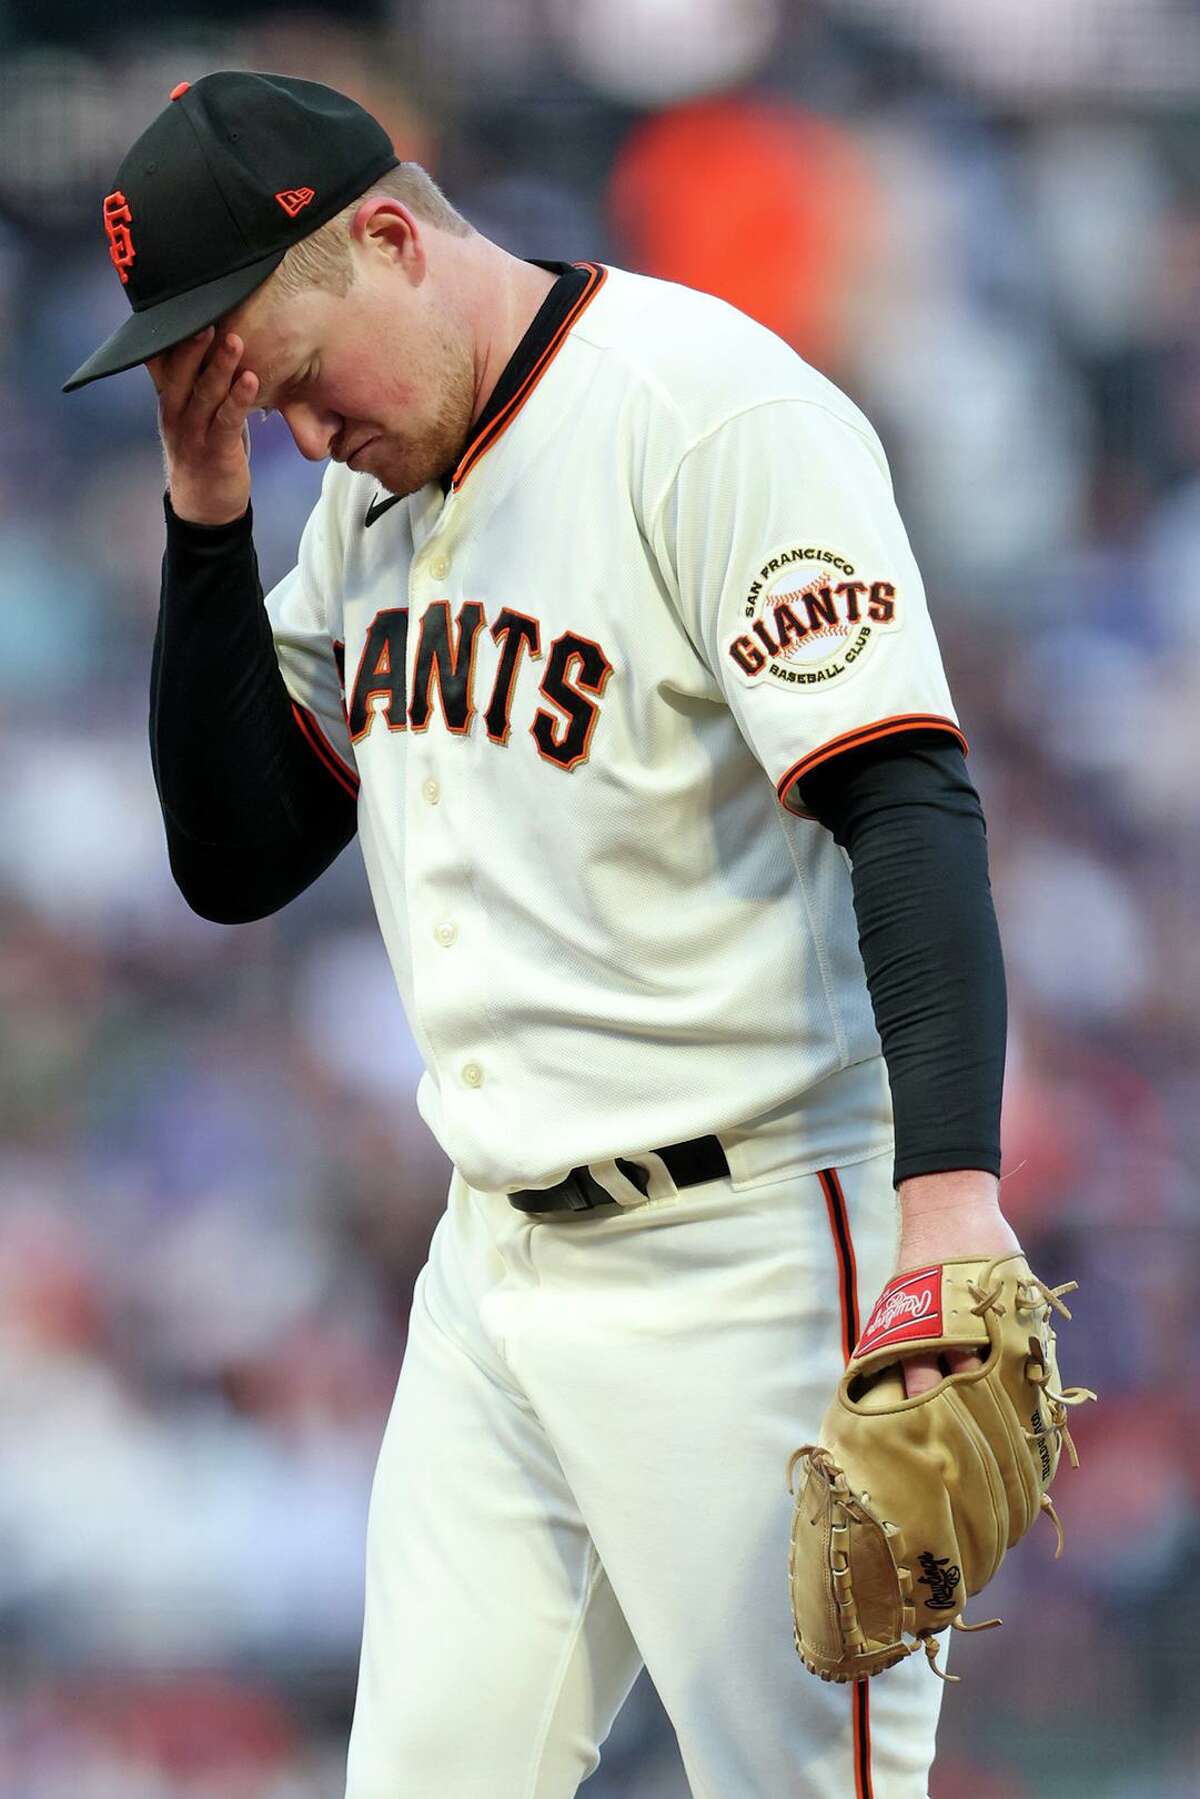 San Francisco Giants’ Logan Webb reacts as Los Angeles Dodgers take a 5-1 lead in 3rd inning during MLB game at Oracle Park in San Francisco, Calif., on Monday, August 1, 2022.